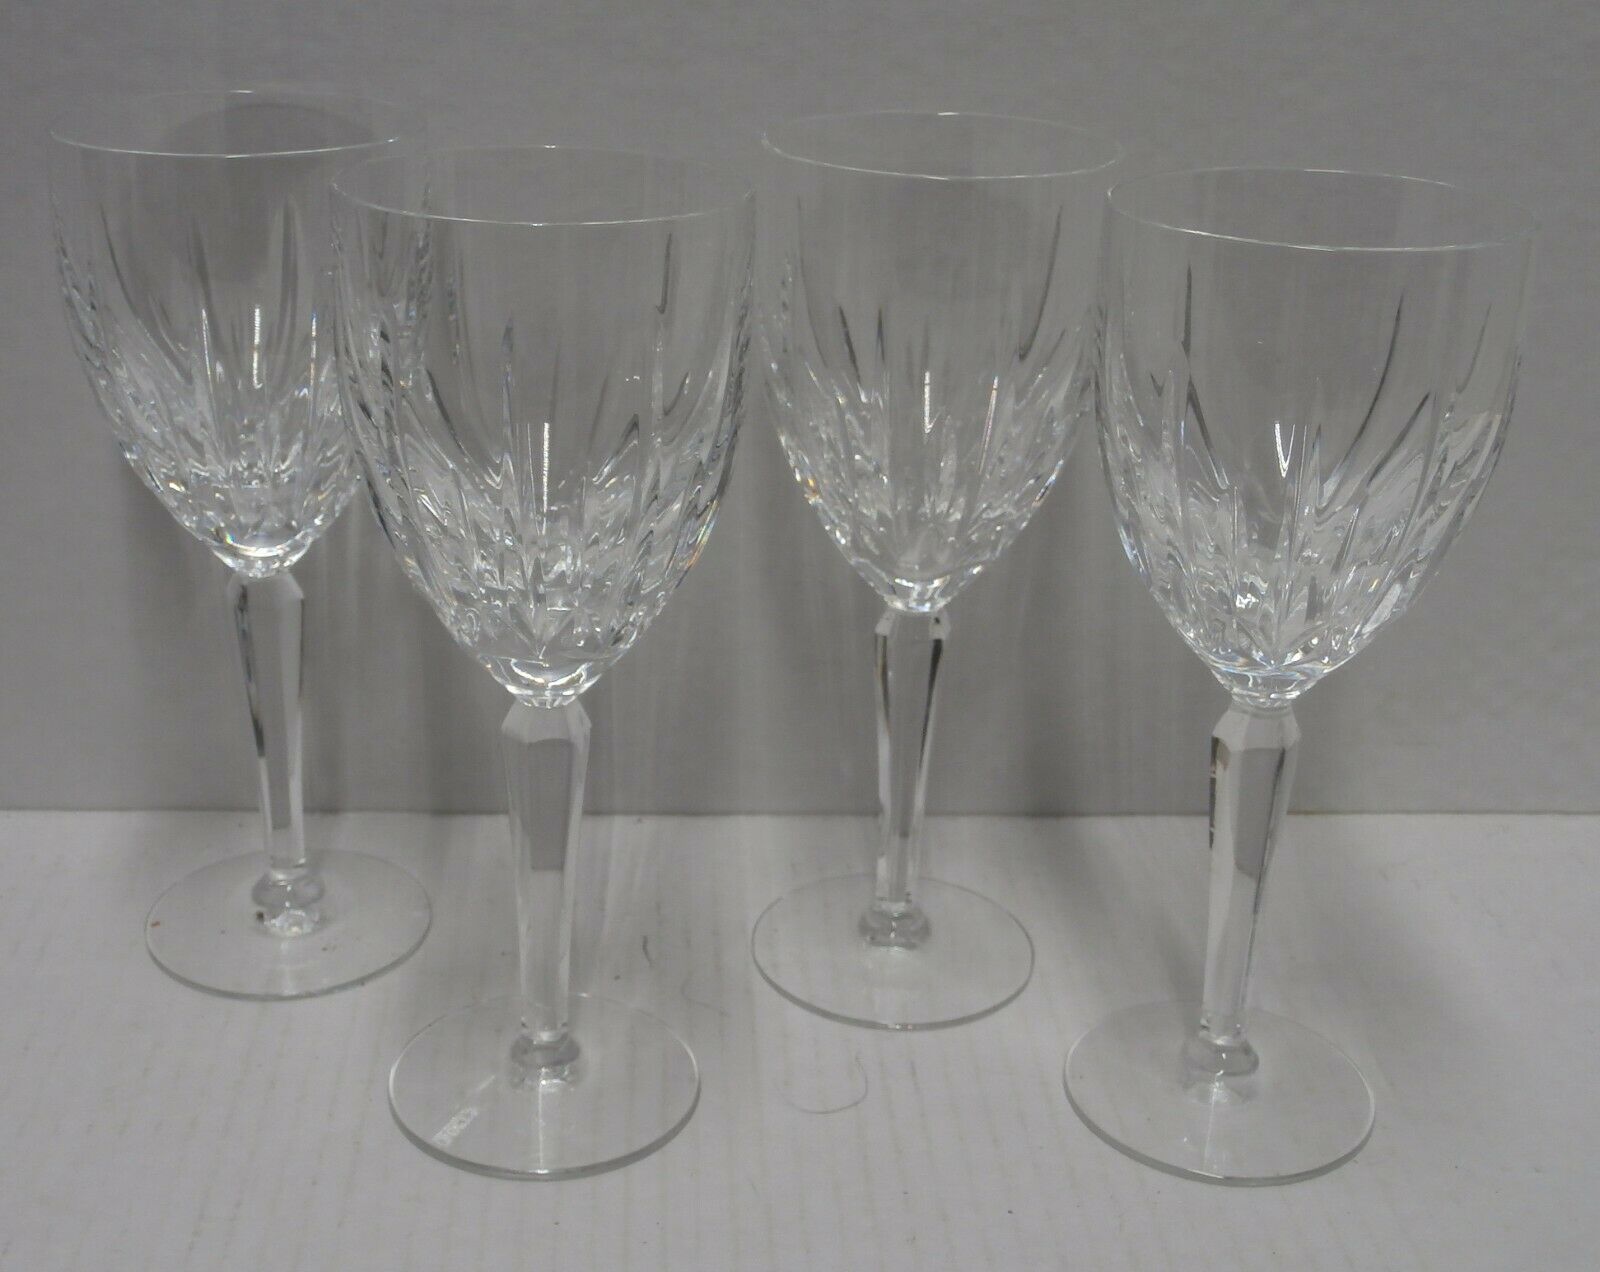 Lenox Lead Crystal Clarity 7" Wine Goblets / Glasses Set Of 4 - S4d